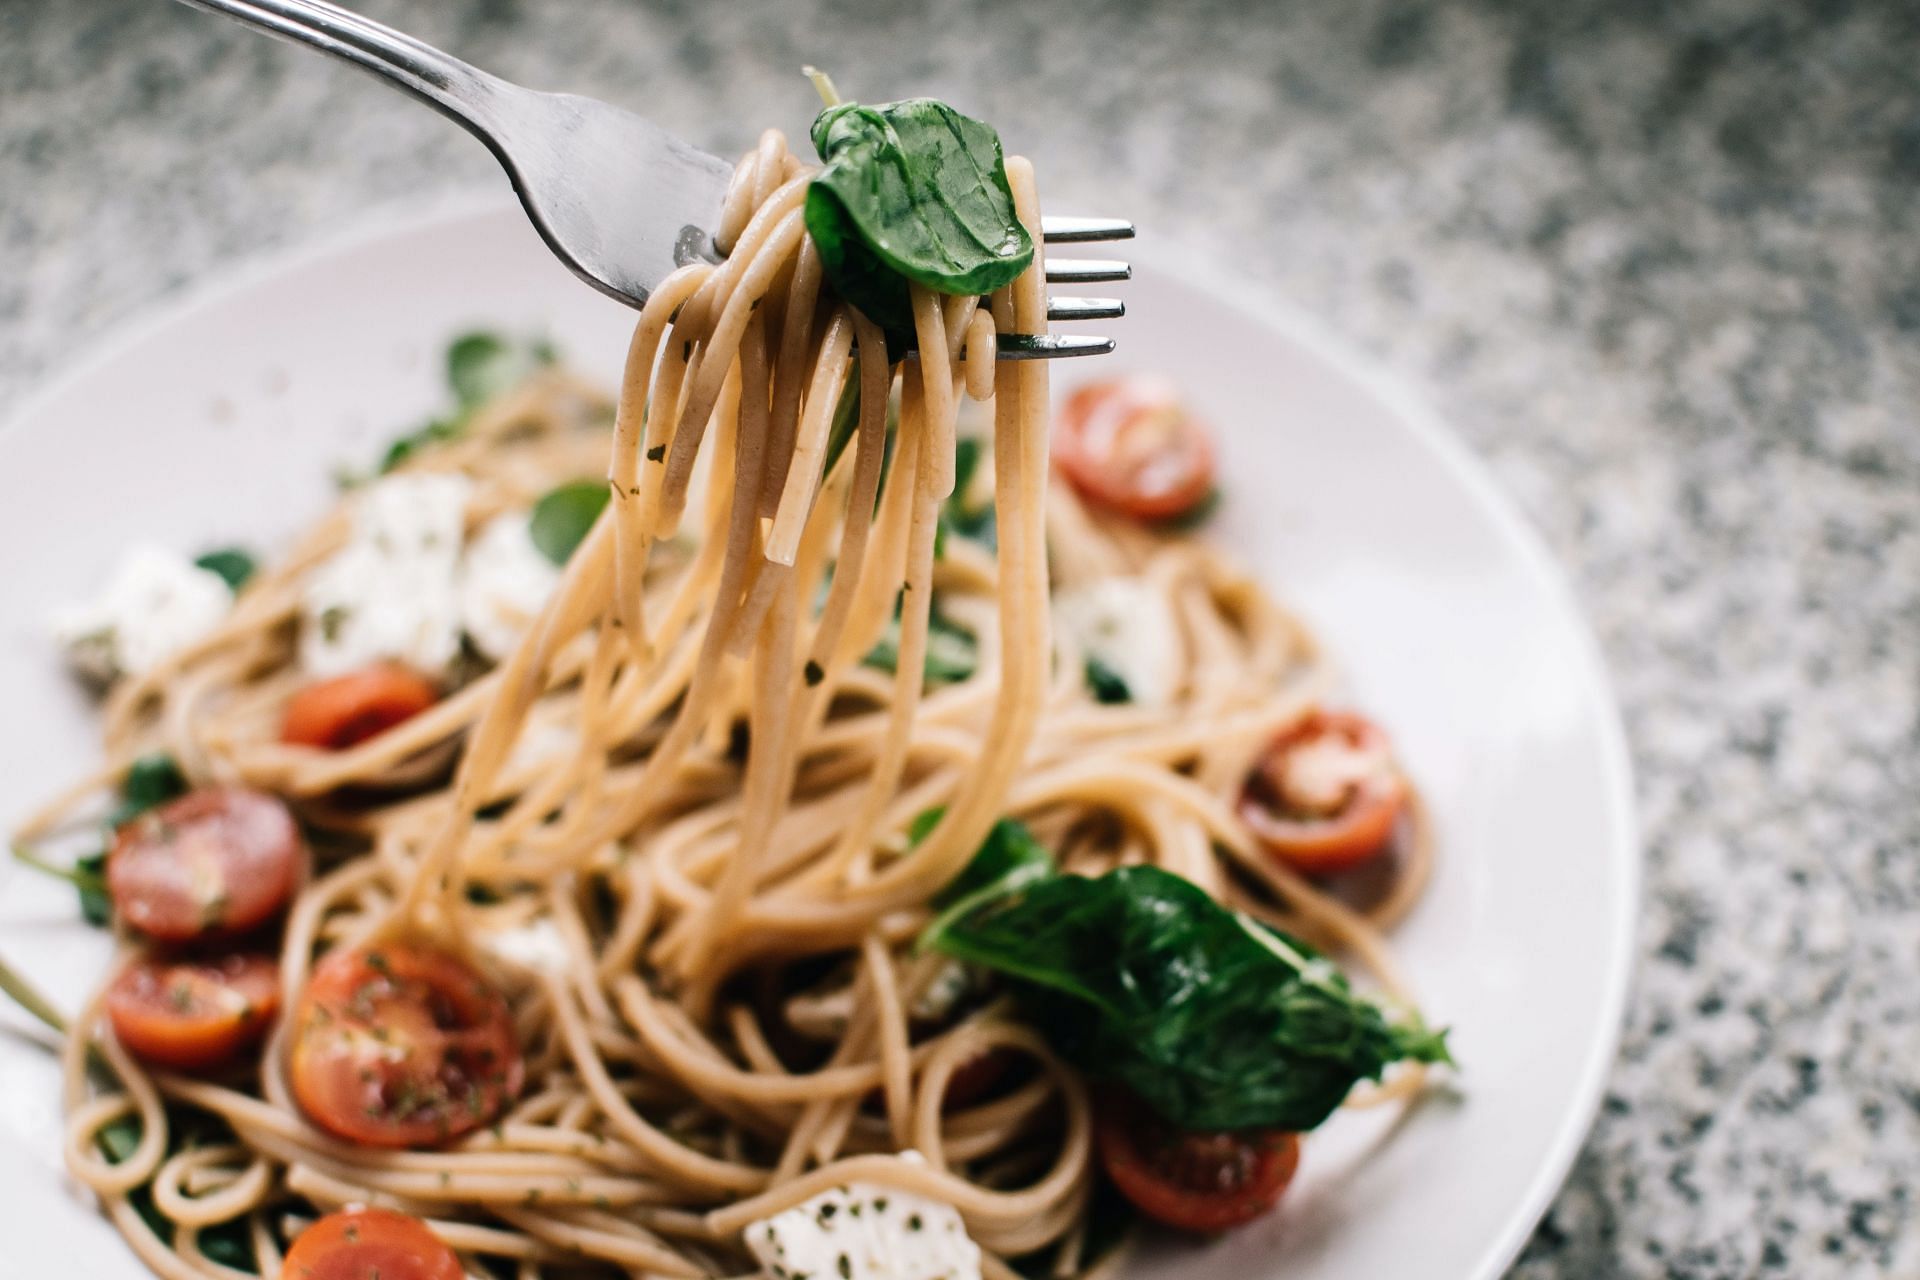 Pasta as a bad carb (image sourced via Pexels / Photo by lisa)